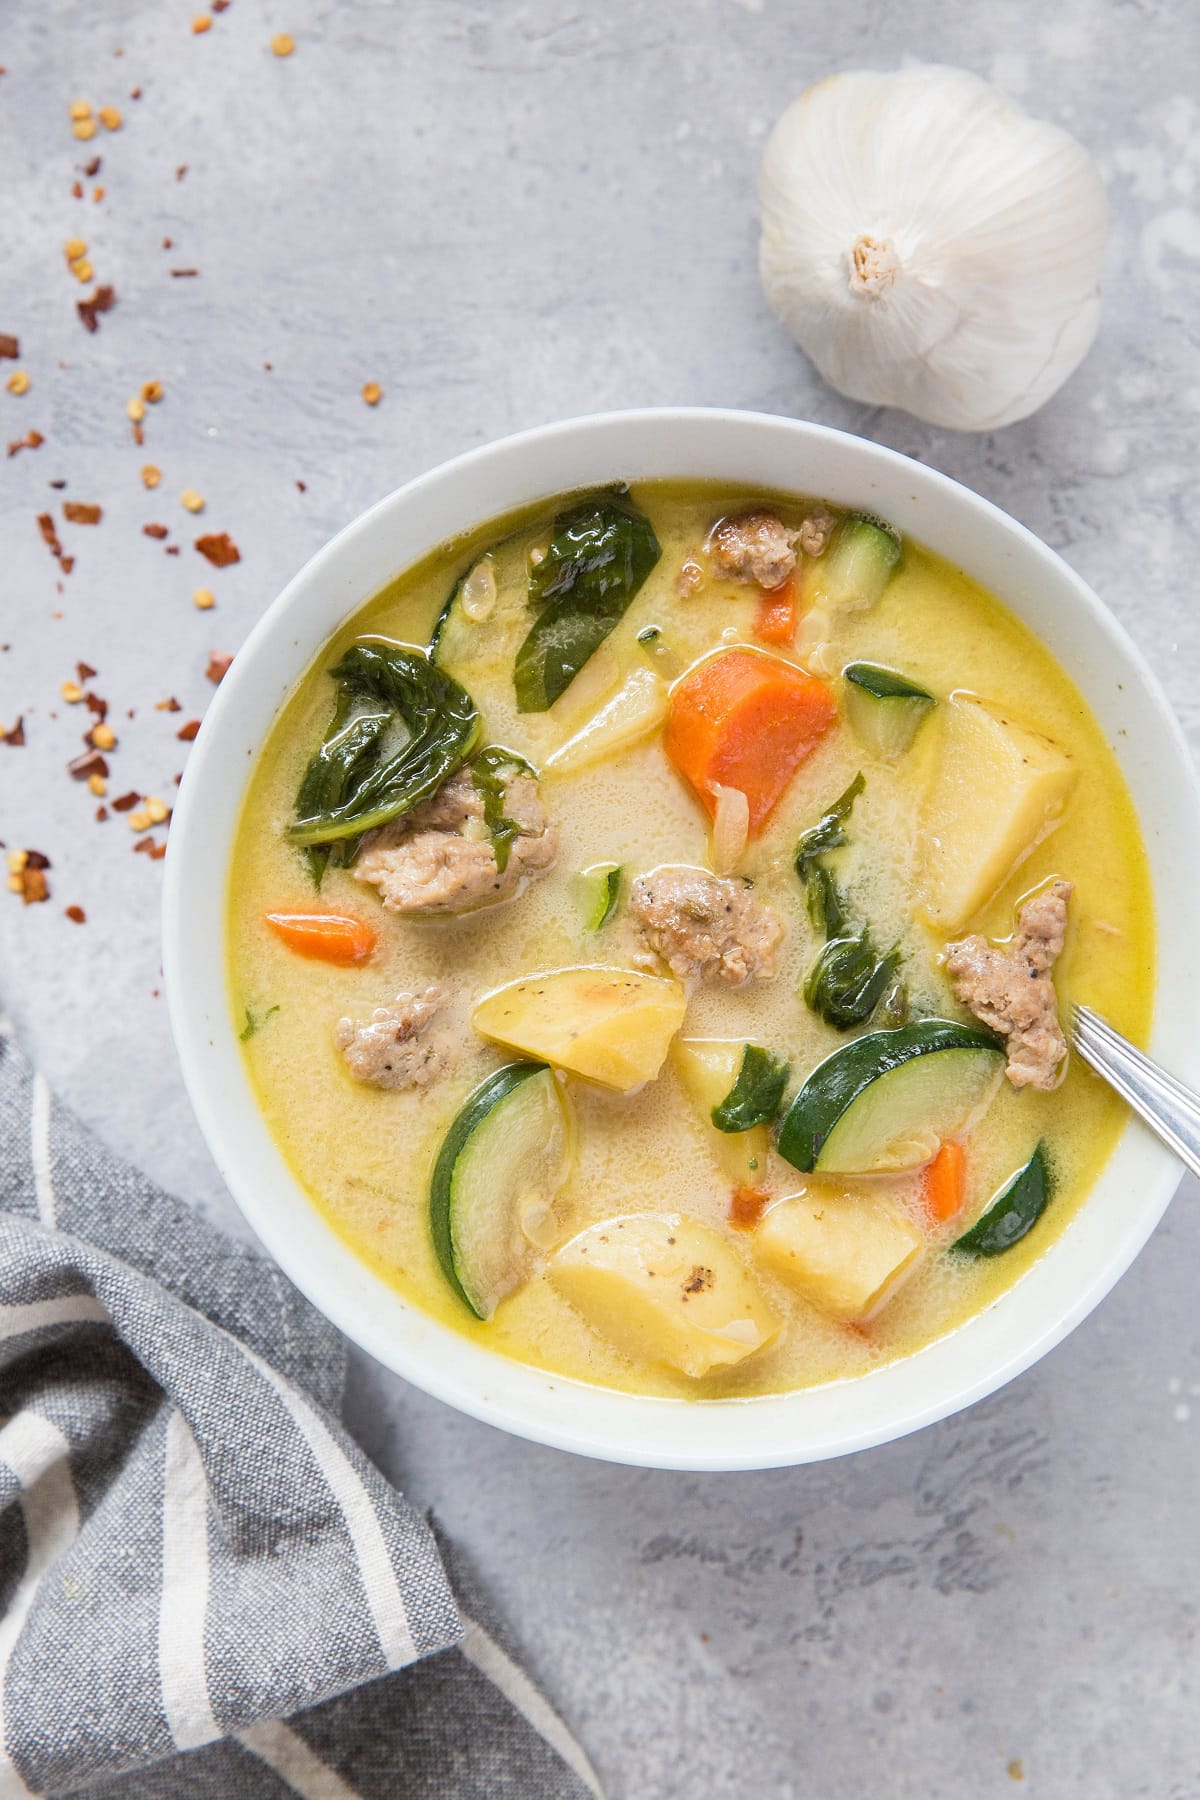 Creamy Ground Turkey and Vegetable Soup - dairy-free, paleo, whole30 healthy soup recipe